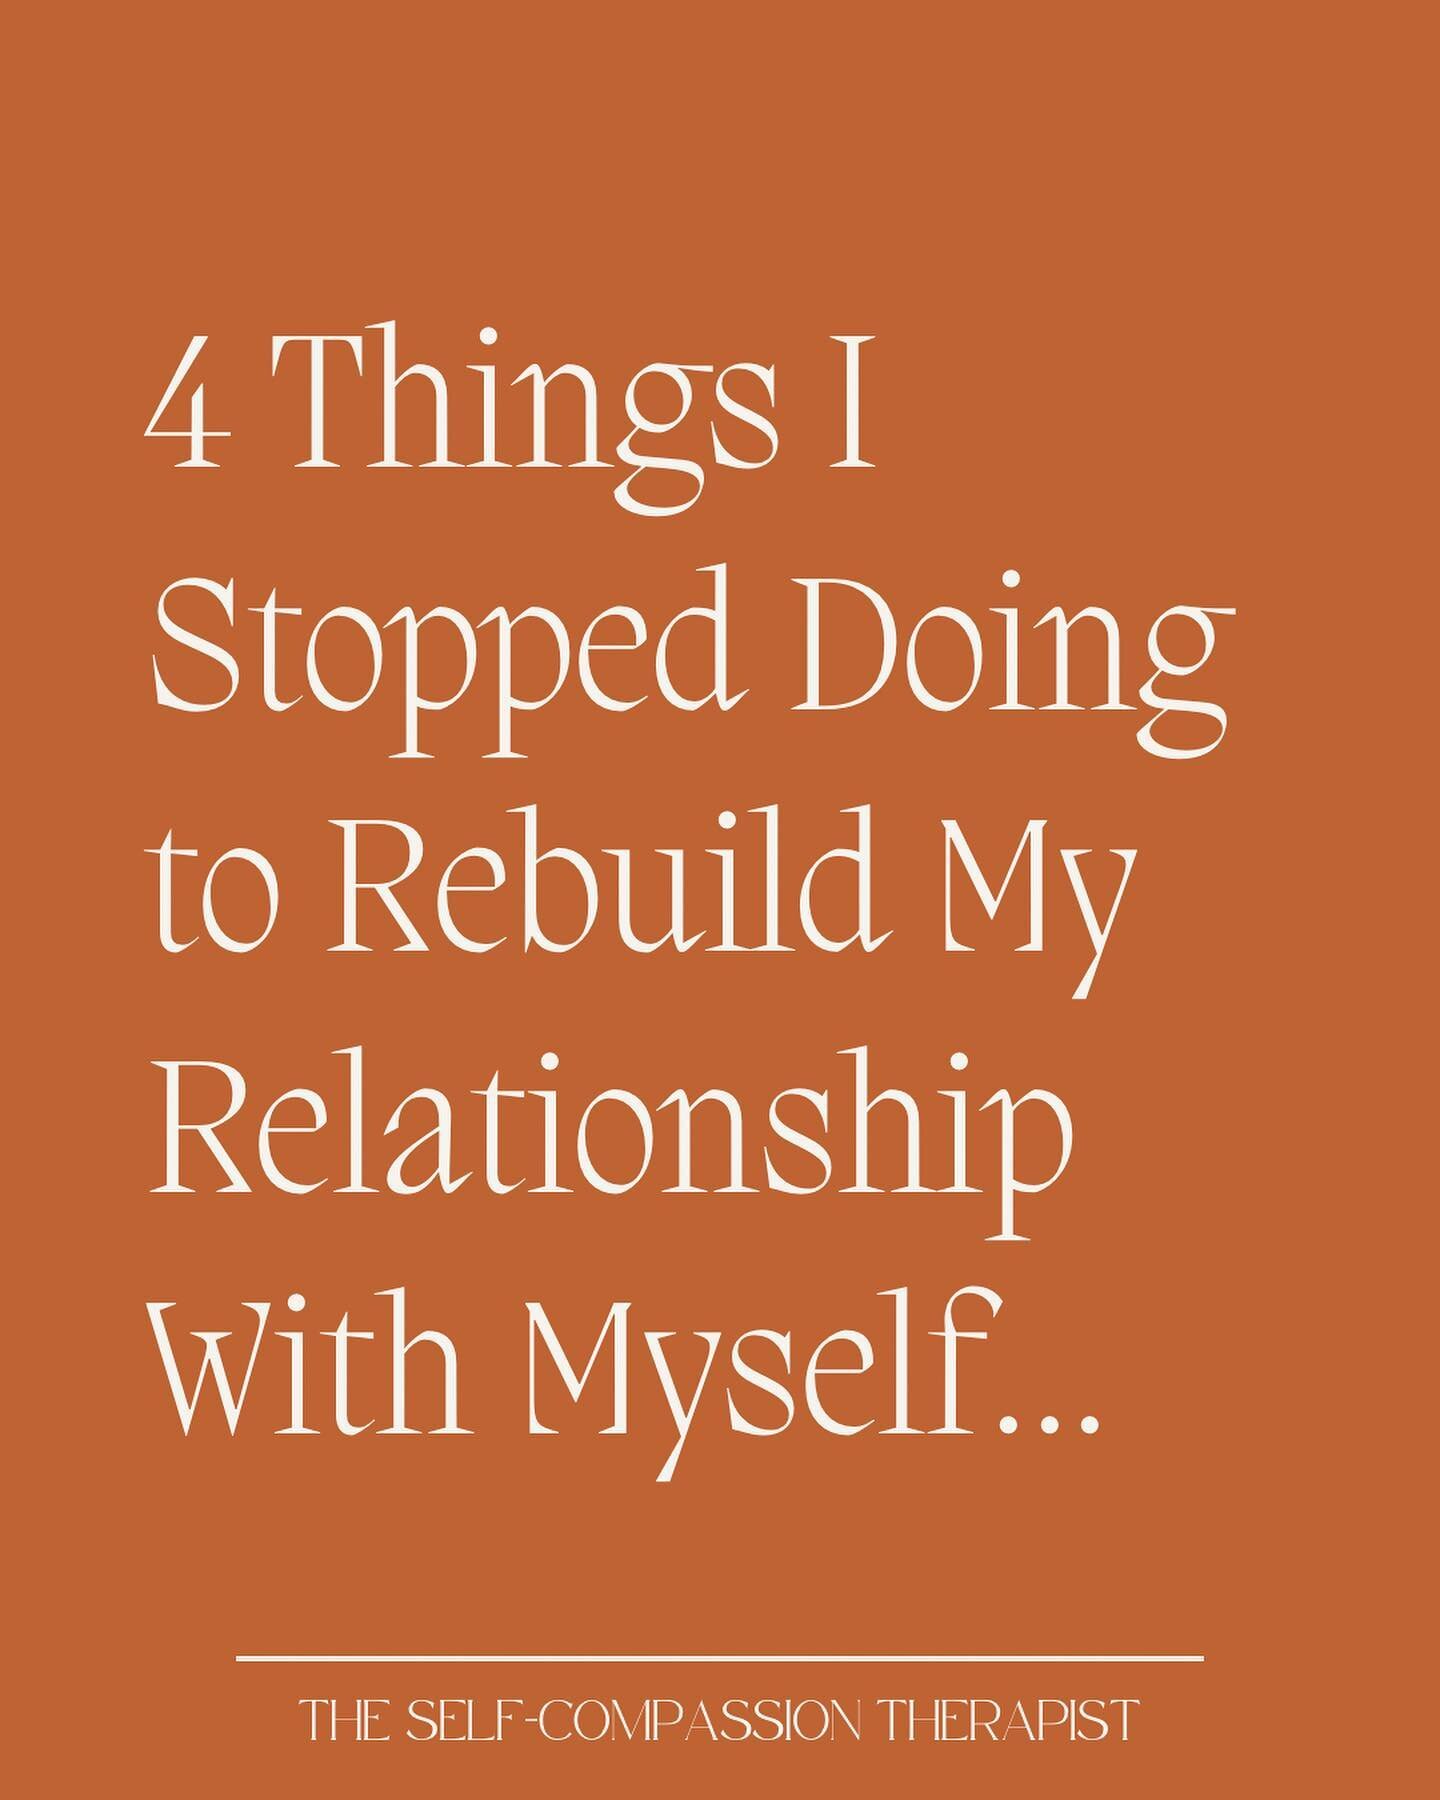 Reflections on rebuilding a compassionate self-relationship 🌞

These shifts in awareness, perspective and behaviour paved the way for a greater sense of creative, self-compassionate freedom ✨

💡 Pay attention and get curious about your behaviour, y